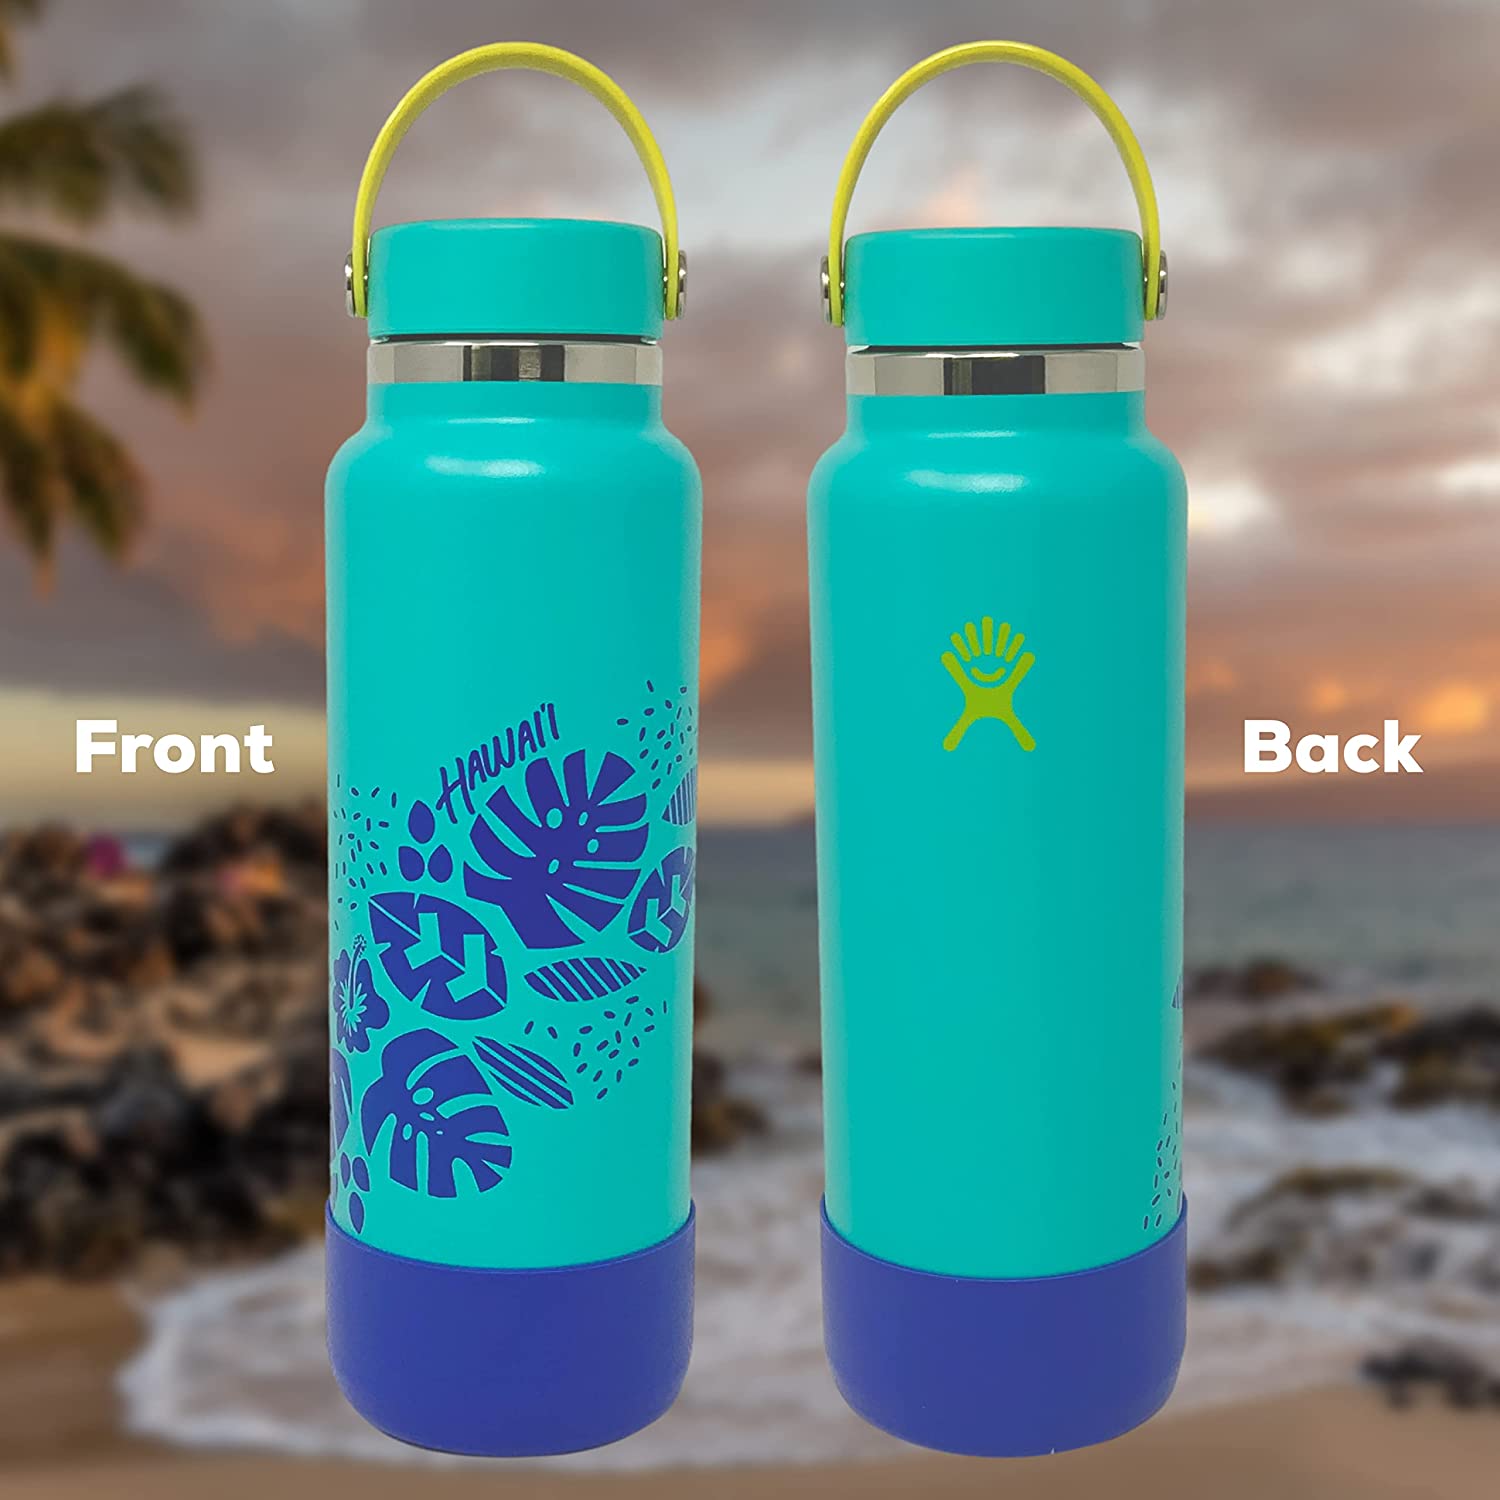 https://watertrackers.com/wp-content/uploads/2022/01/Hydroflask-Hawaii-Limited-Edition-Mint-front-and-back.jpg